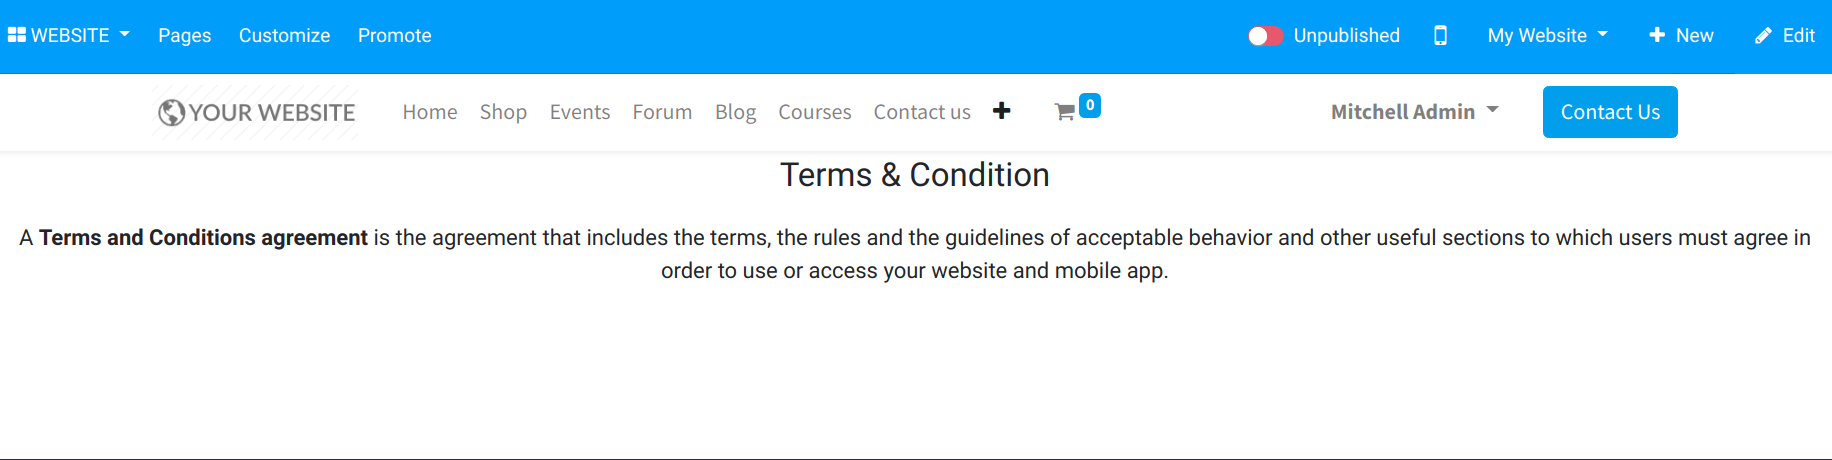 General Terms & Conditions on your website